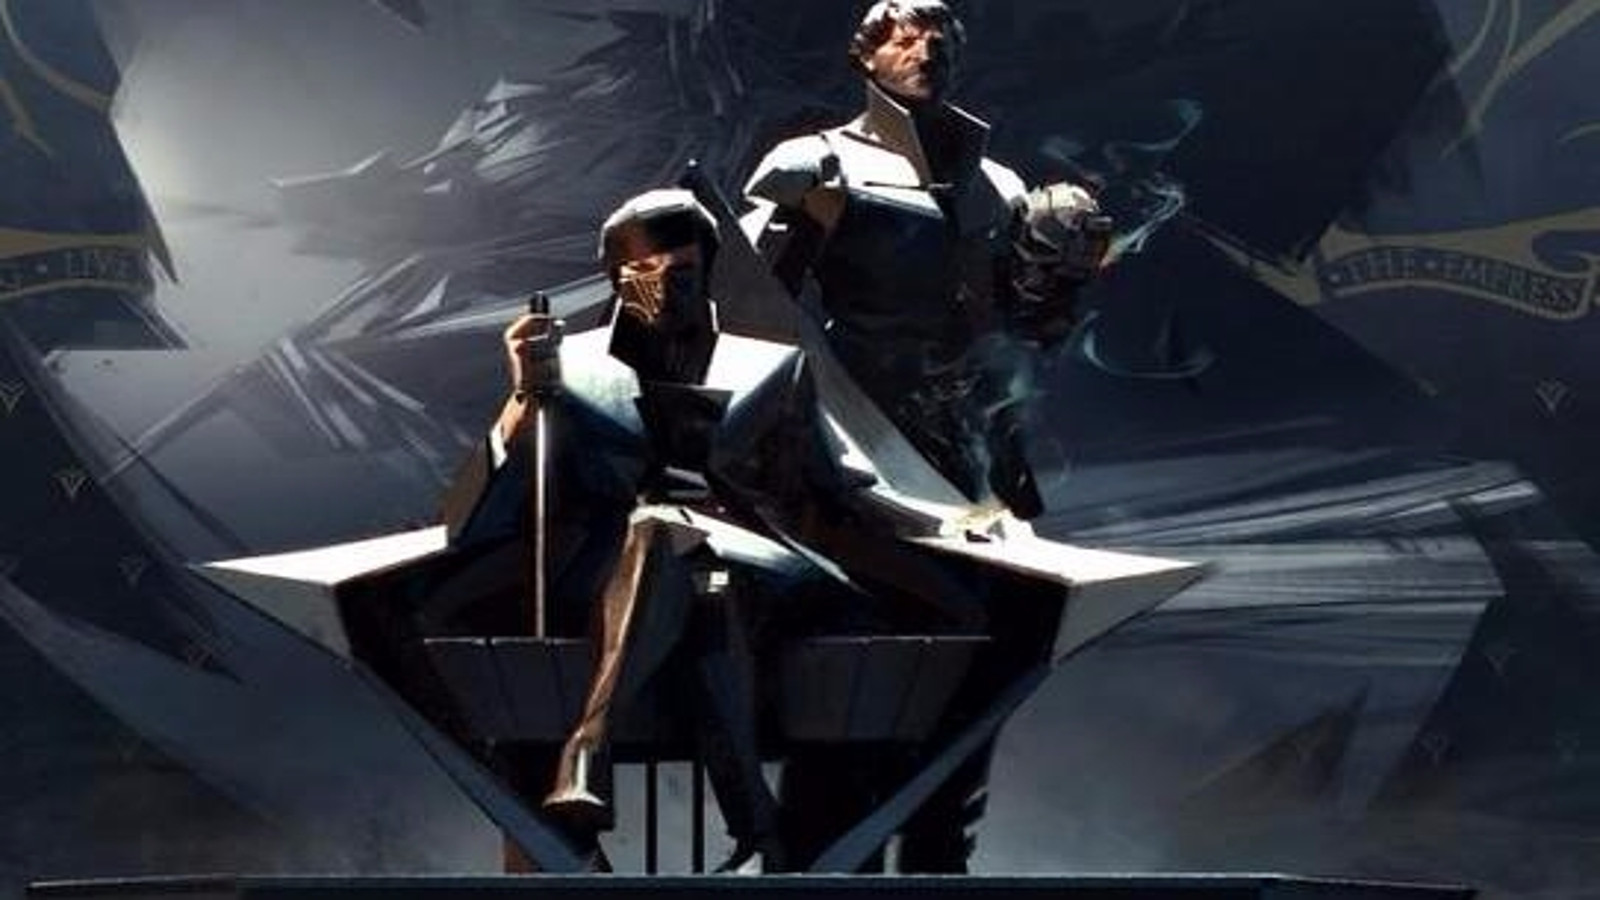 Review: Dishonored 2—From Dunwall to Karnaca